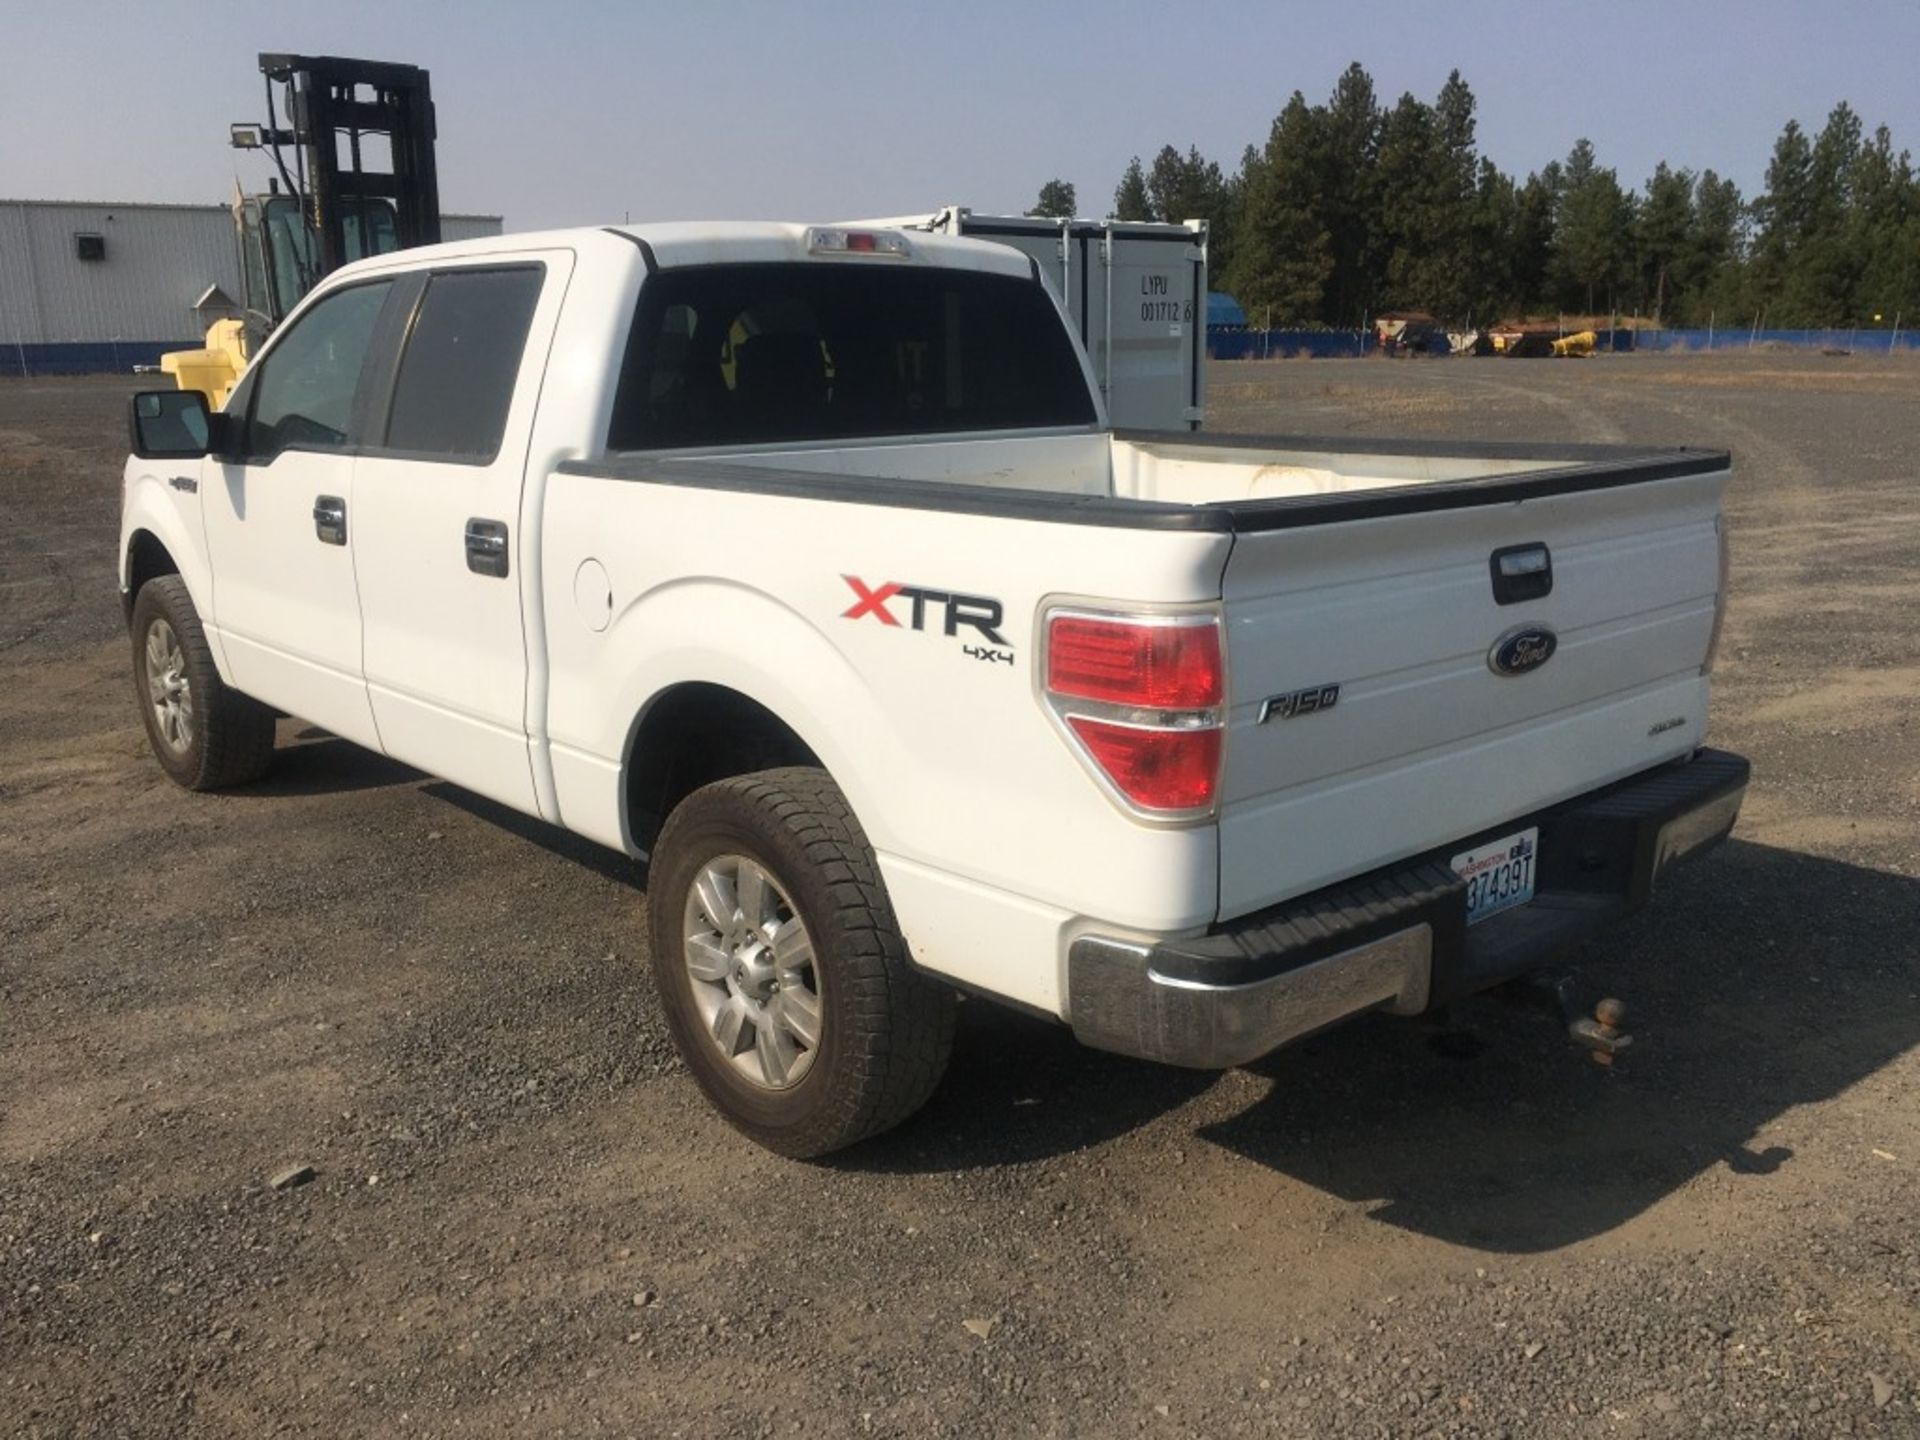 2012 Ford F150 XLT 4x4 Crew Cab Pickup - Image 3 of 24